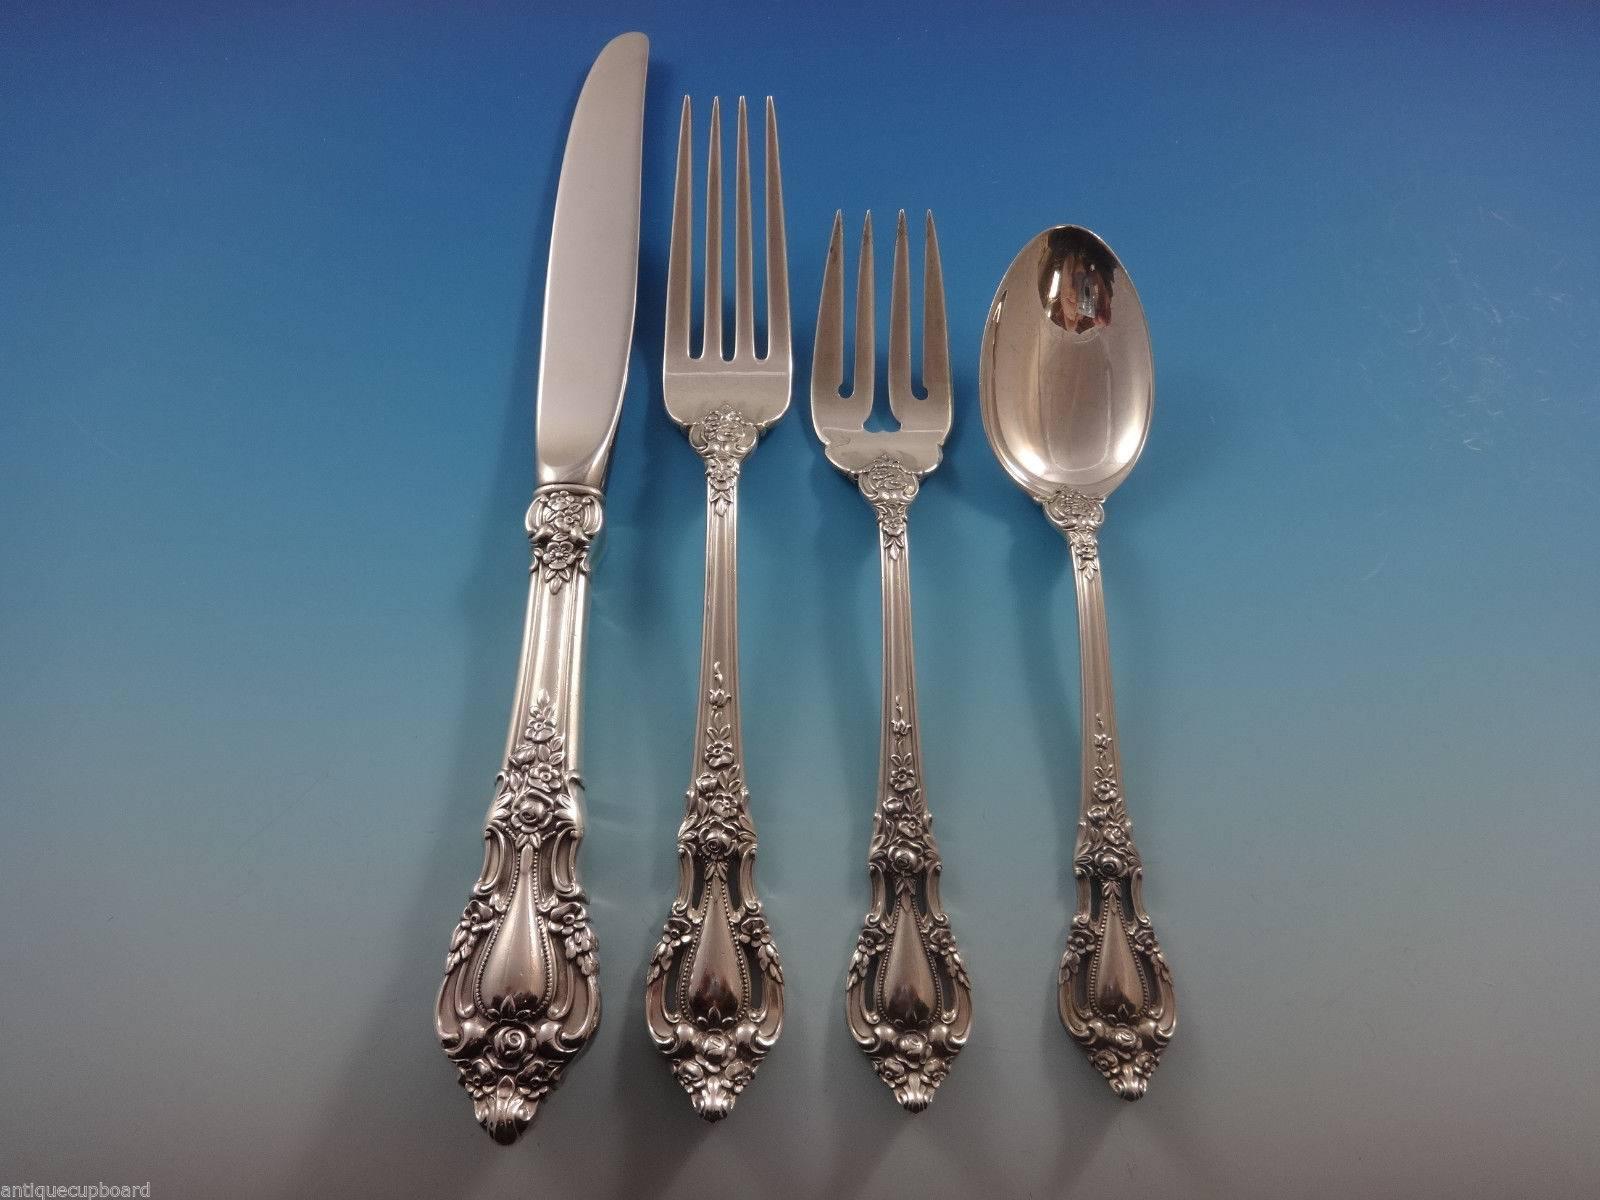 Stunning Eloquence by Lunt sterling silver flatware set of 28 pieces. This set includes:

Six knives, 9 1/8